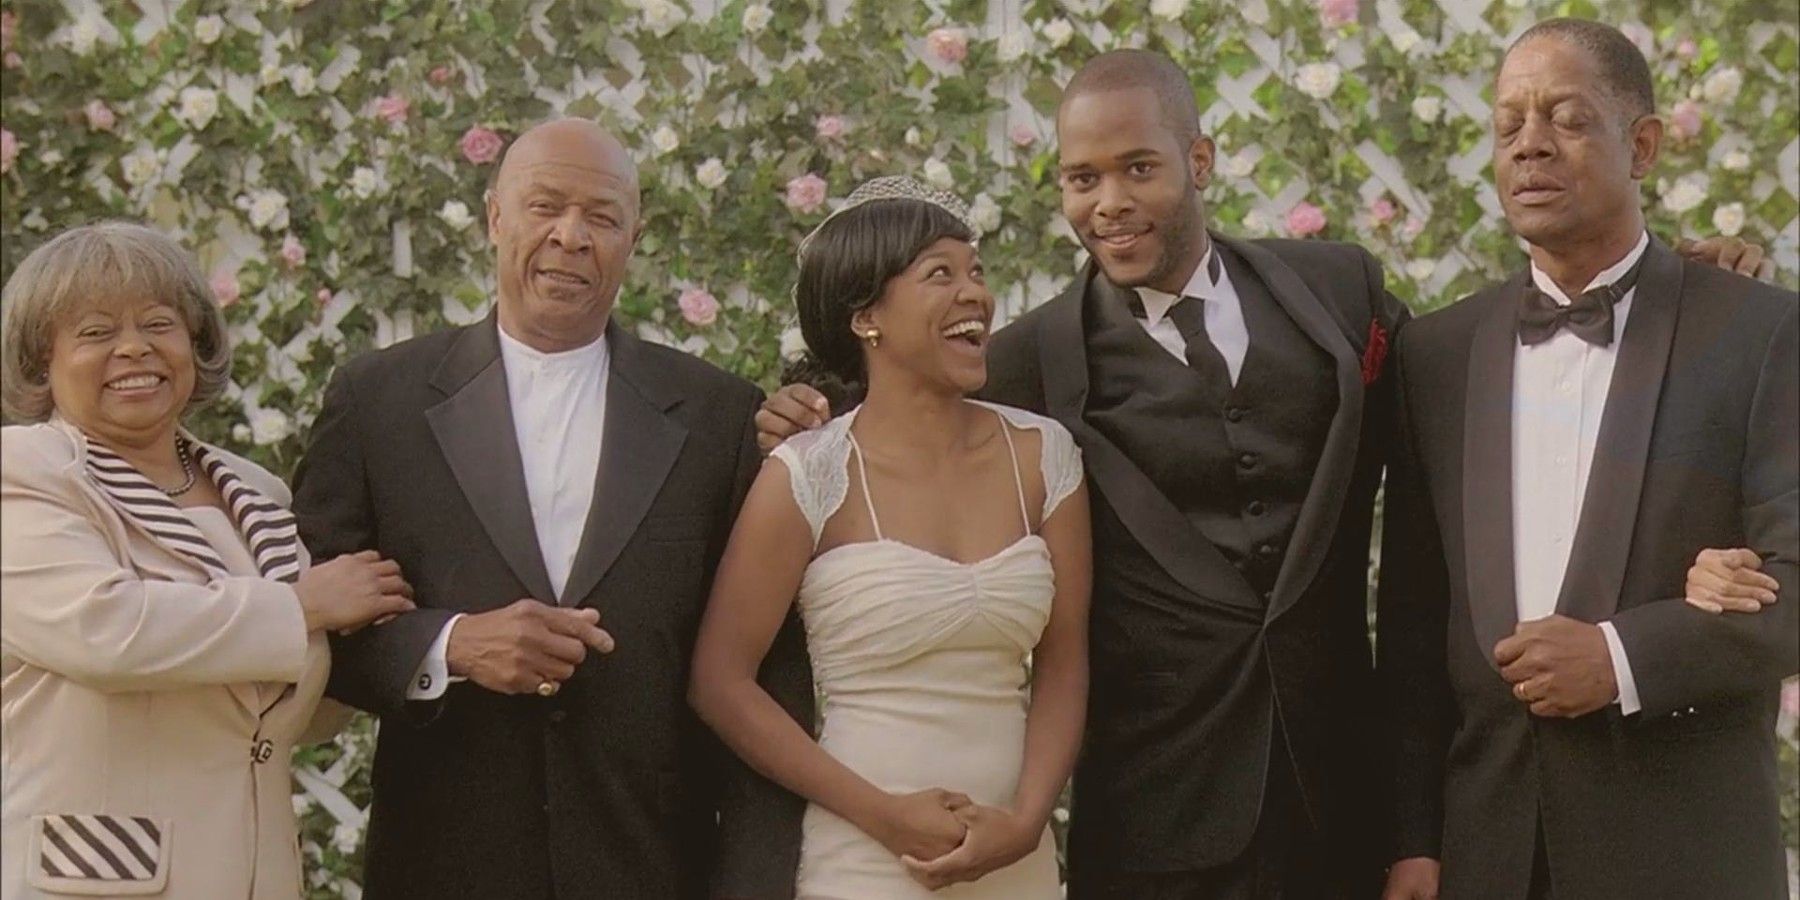 Isaiah Johnson's wedding in Ari Aster's The Strange Thing About the Johnsons